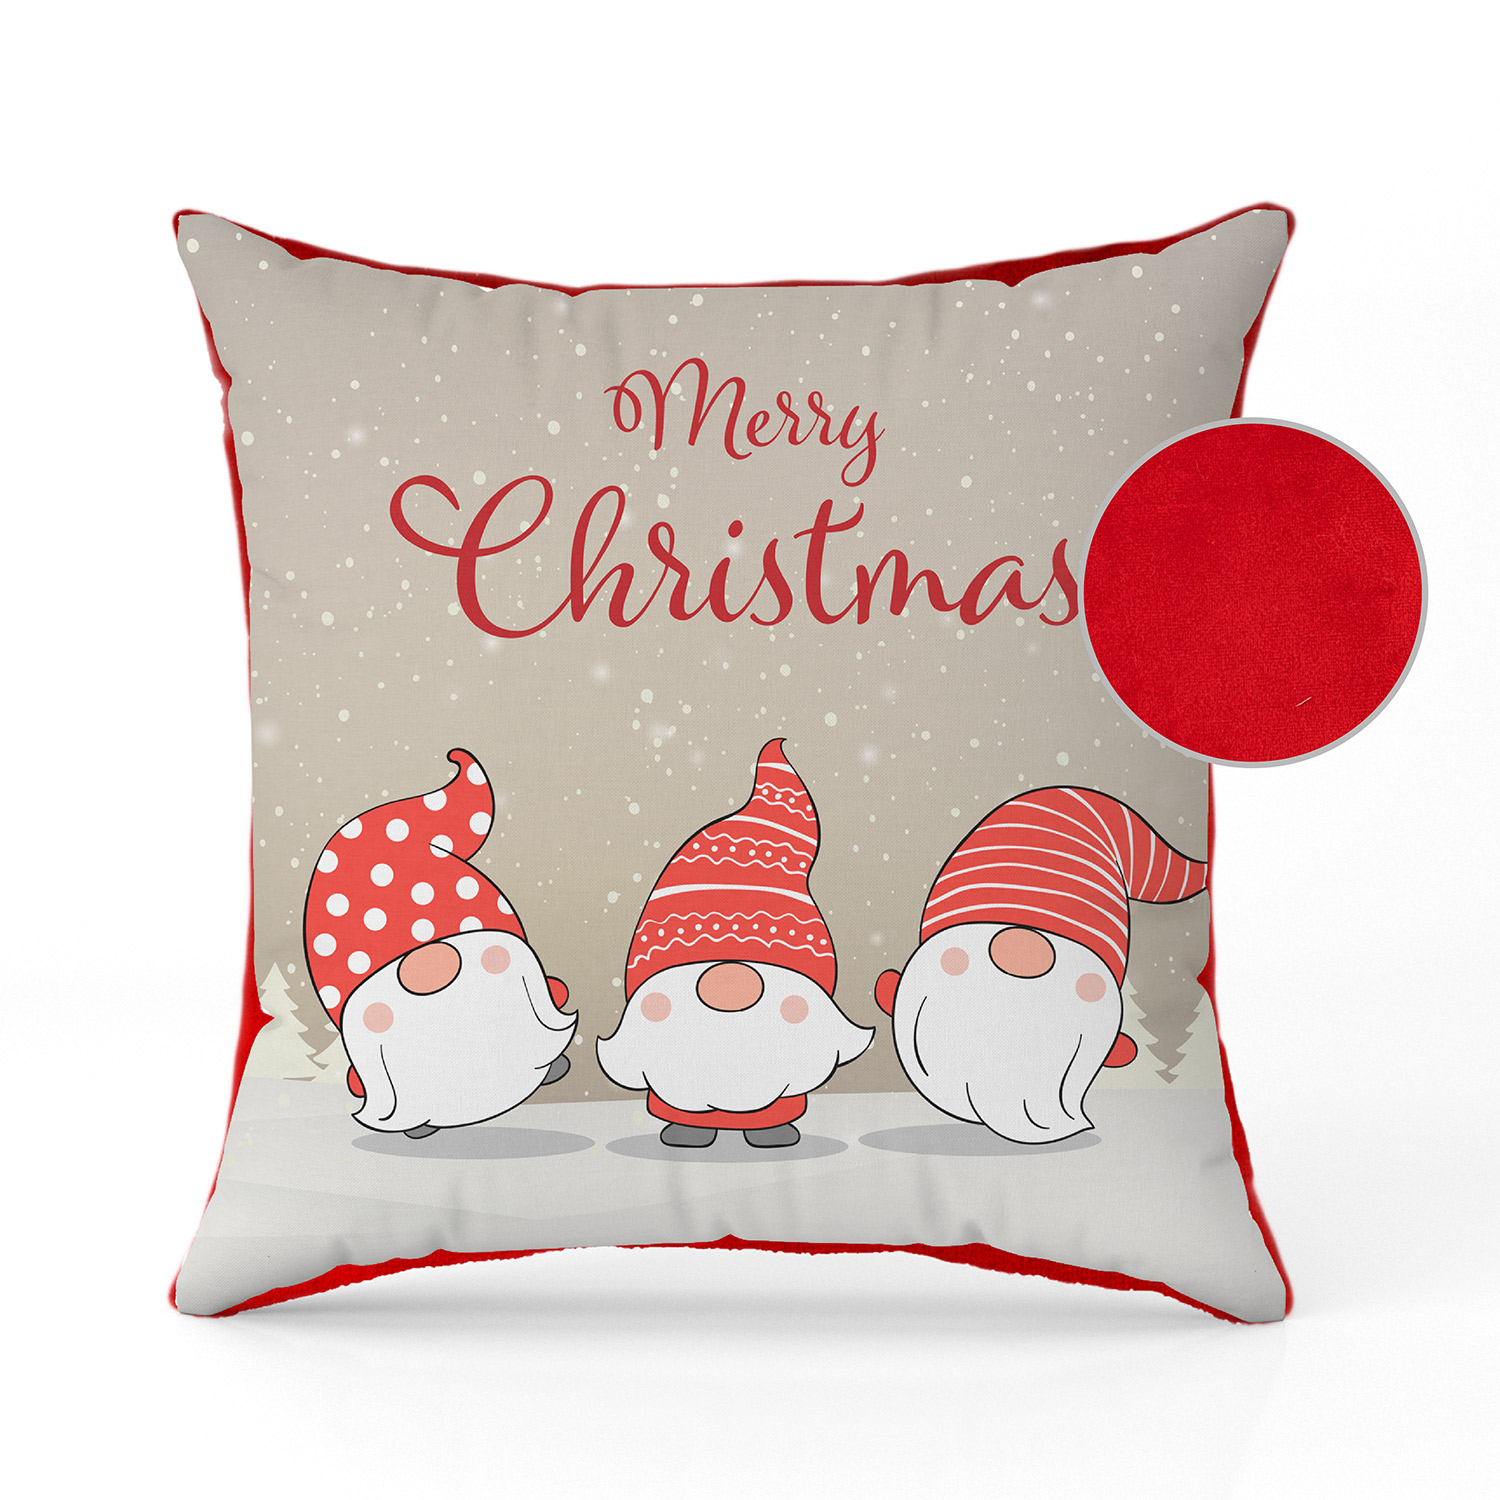 Christmas pillow with gnomes